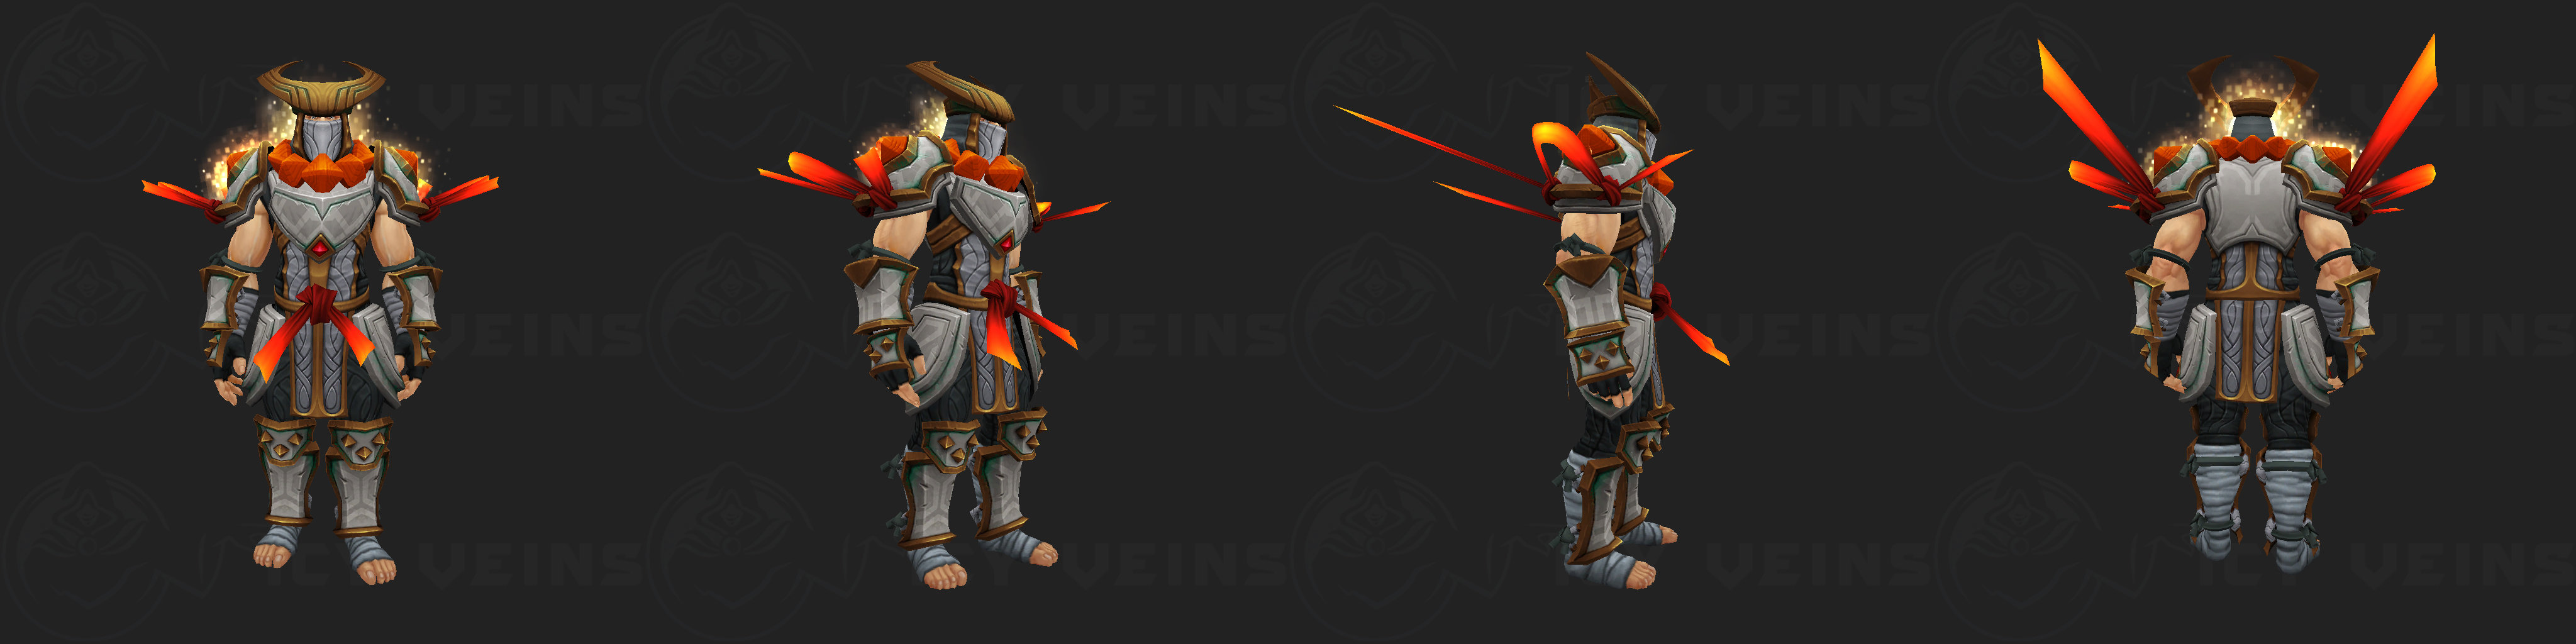 Patch 9.2: Monk Set Preview - - Icy